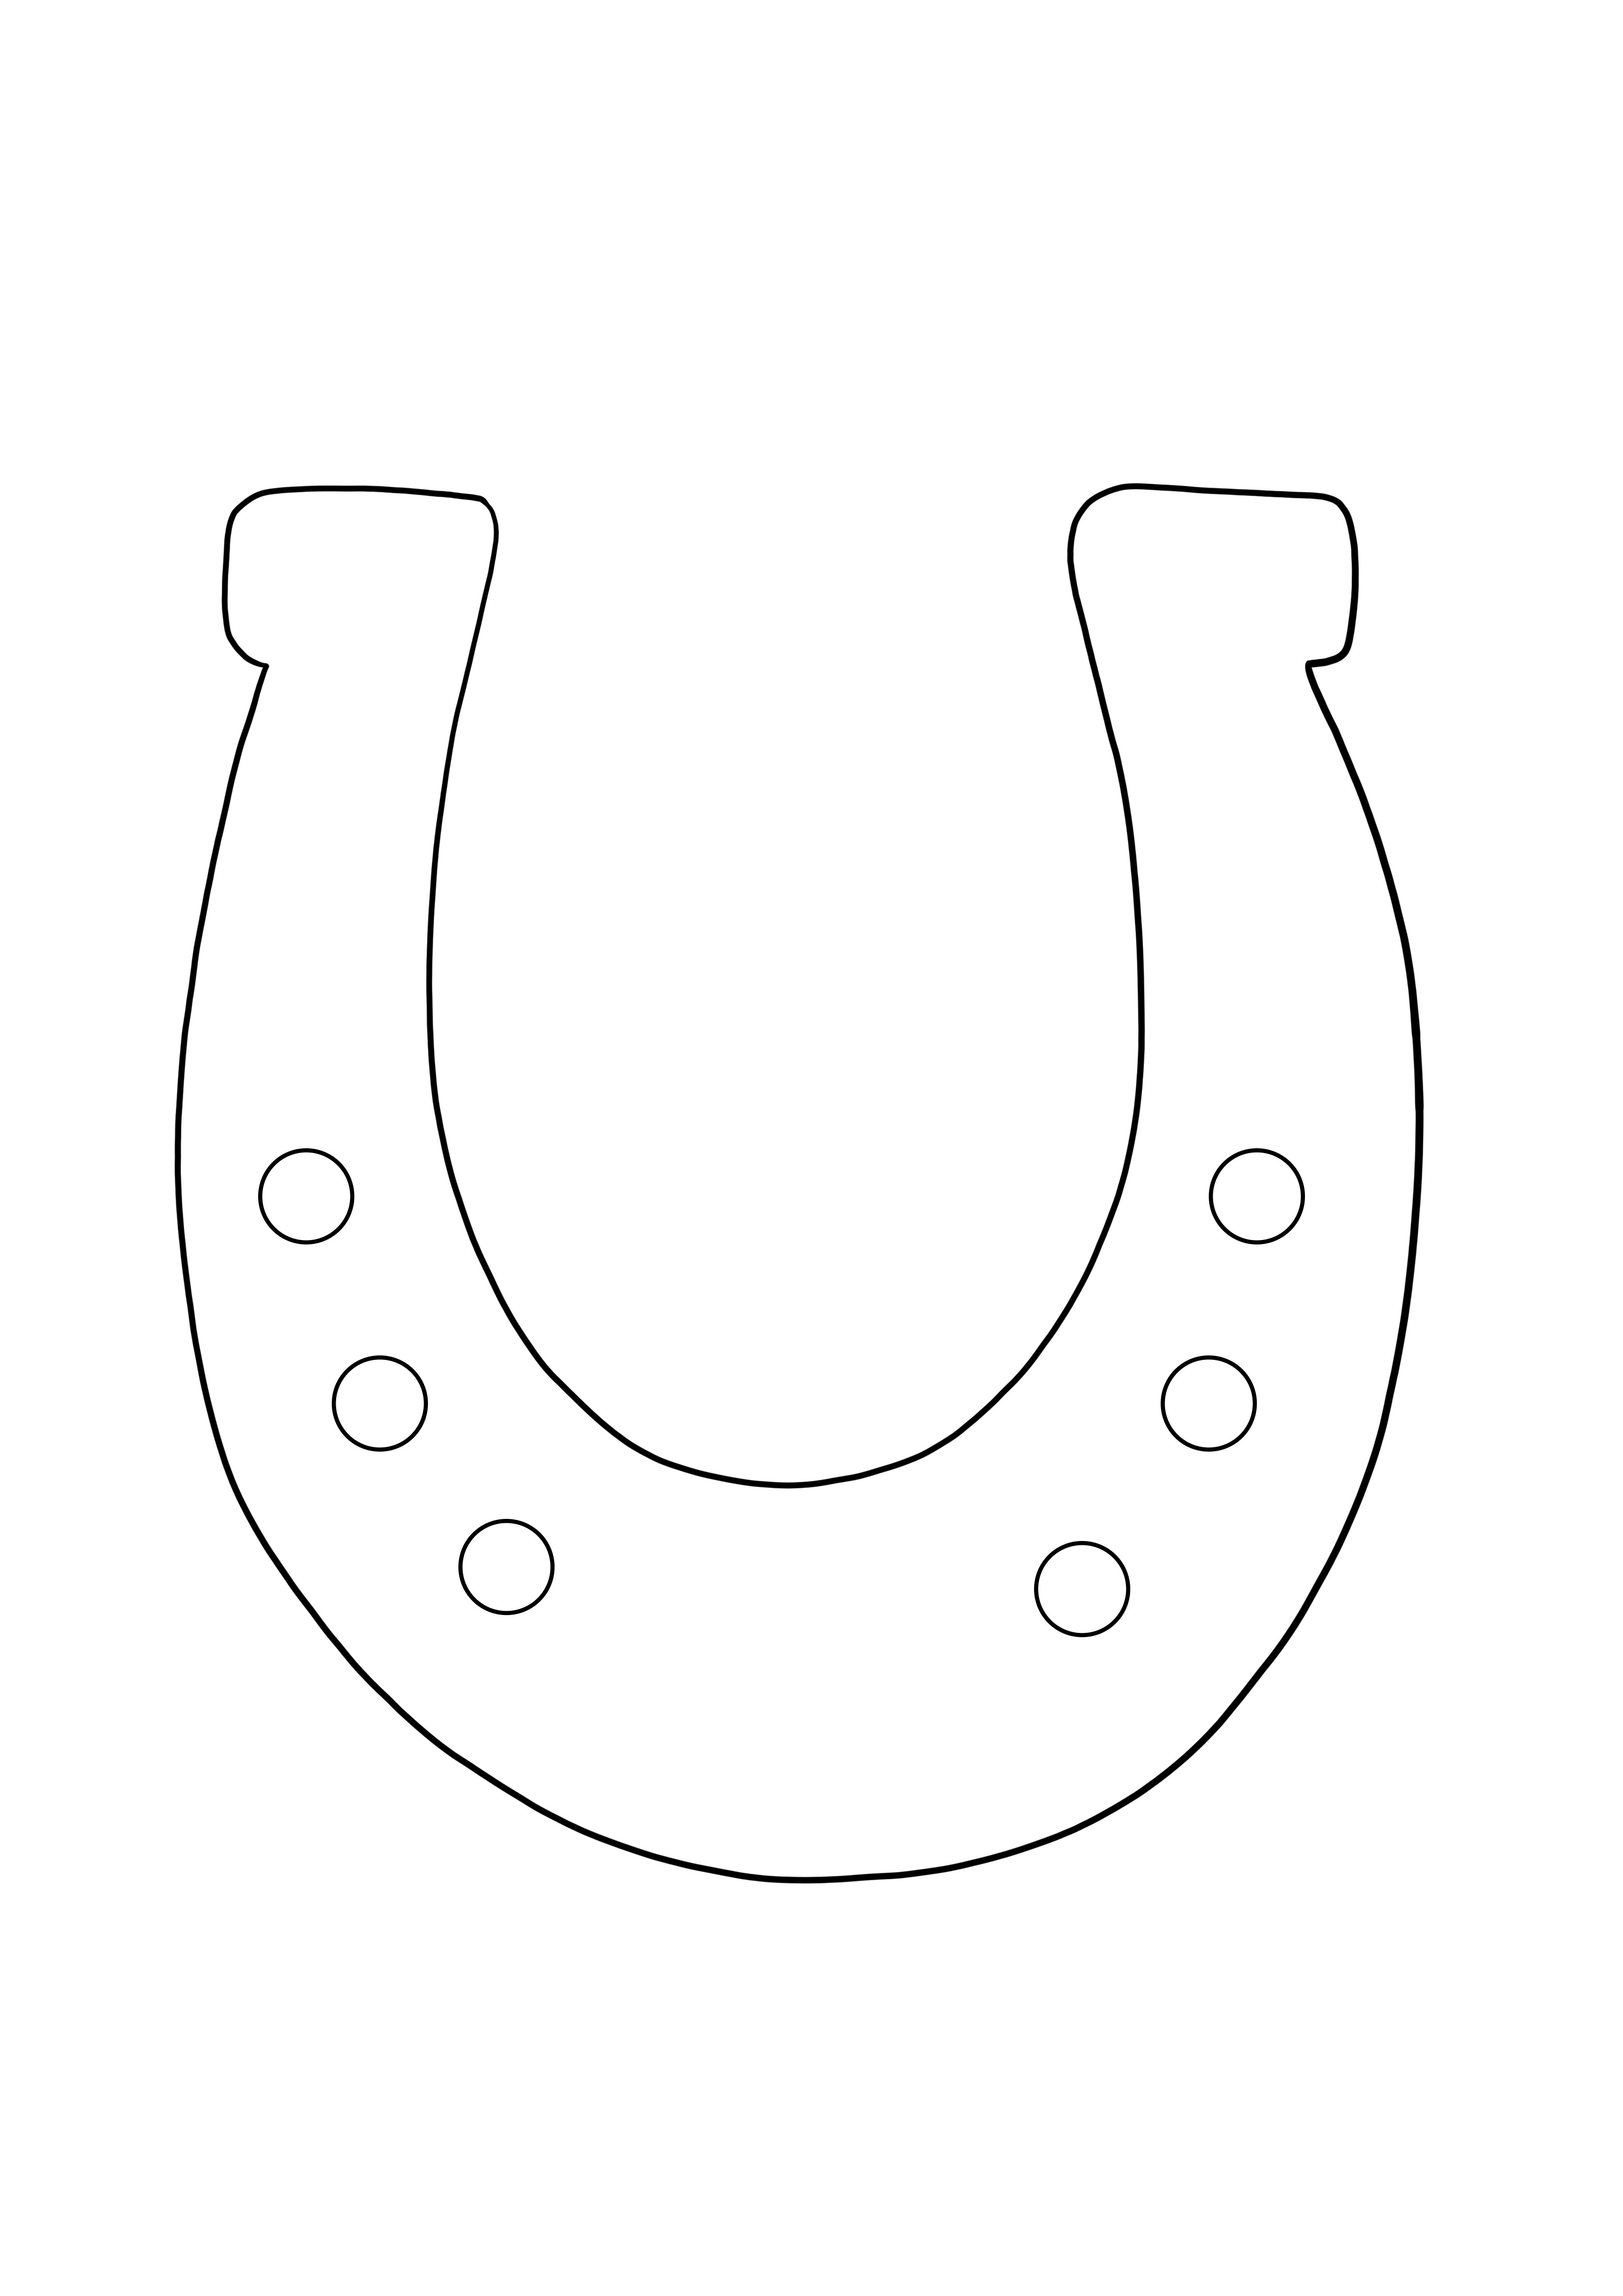 Horseshoe to download and print for free